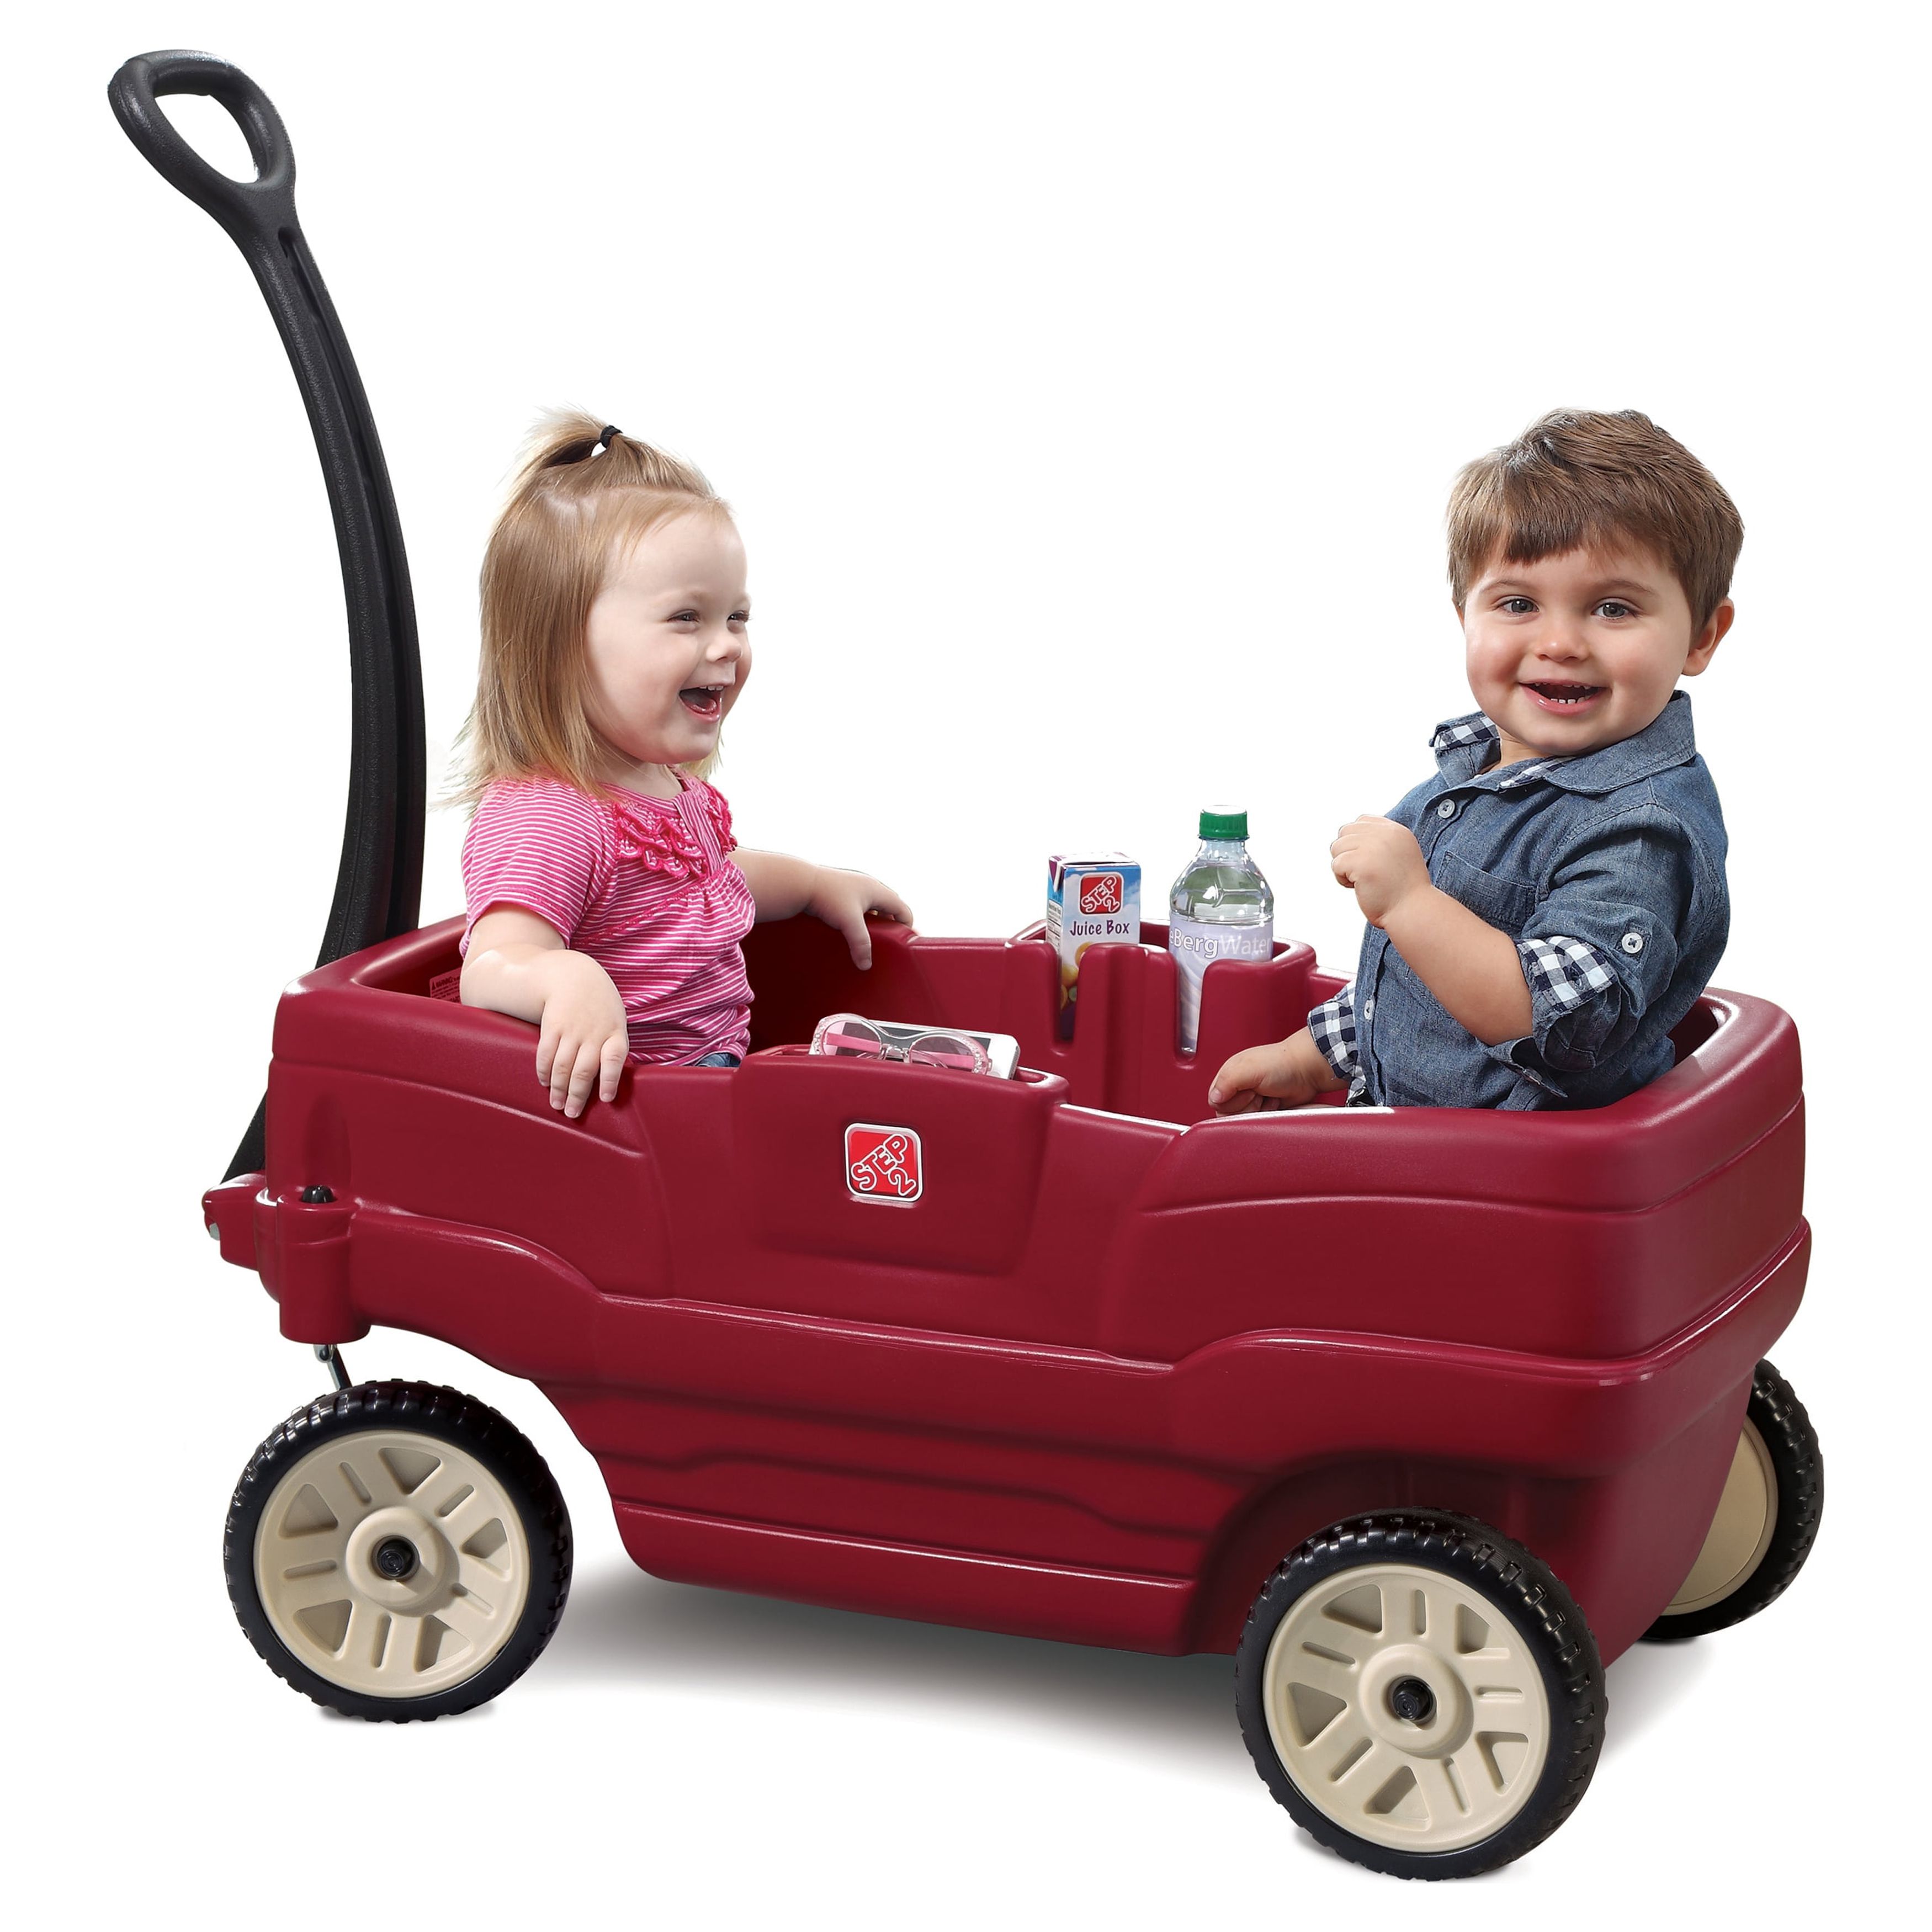 Step2 Neighborhood Red Wagon for Toddlers - image 1 of 4